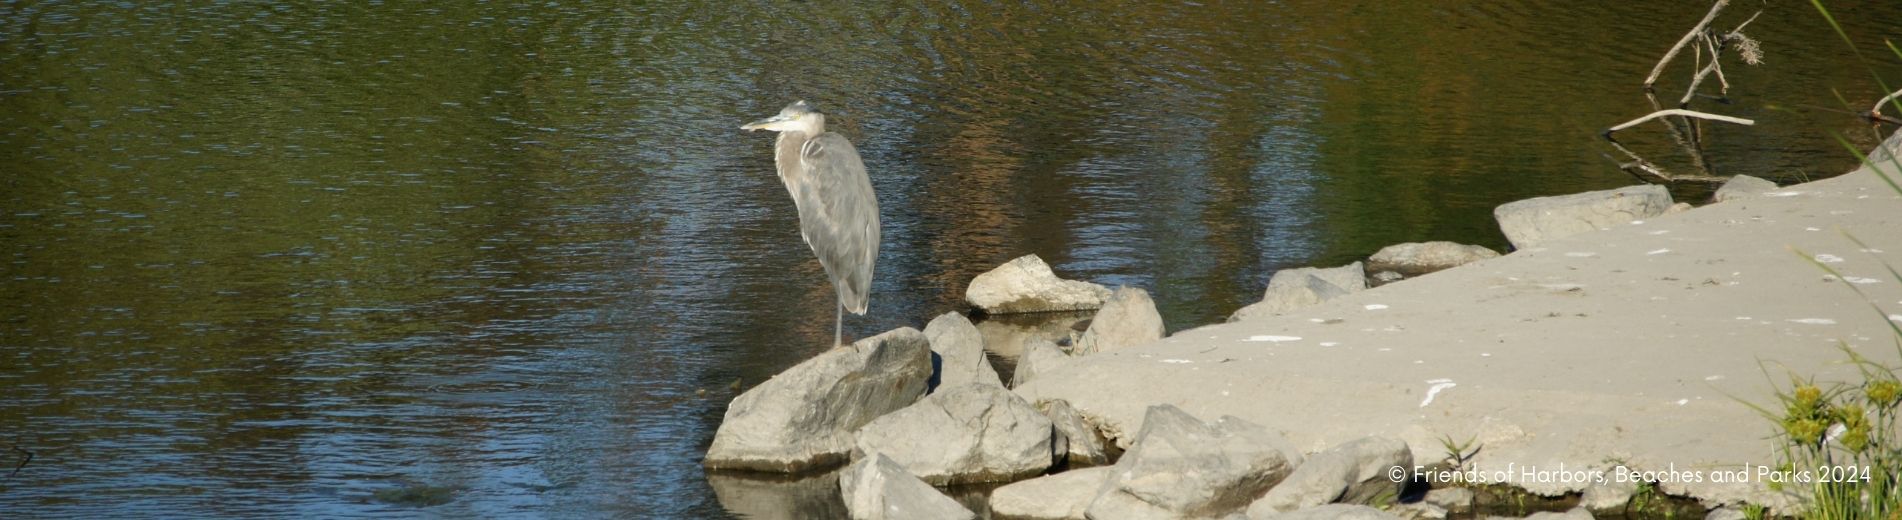 Great Blue Heron at a pond standing on grey rocks in a park setting.